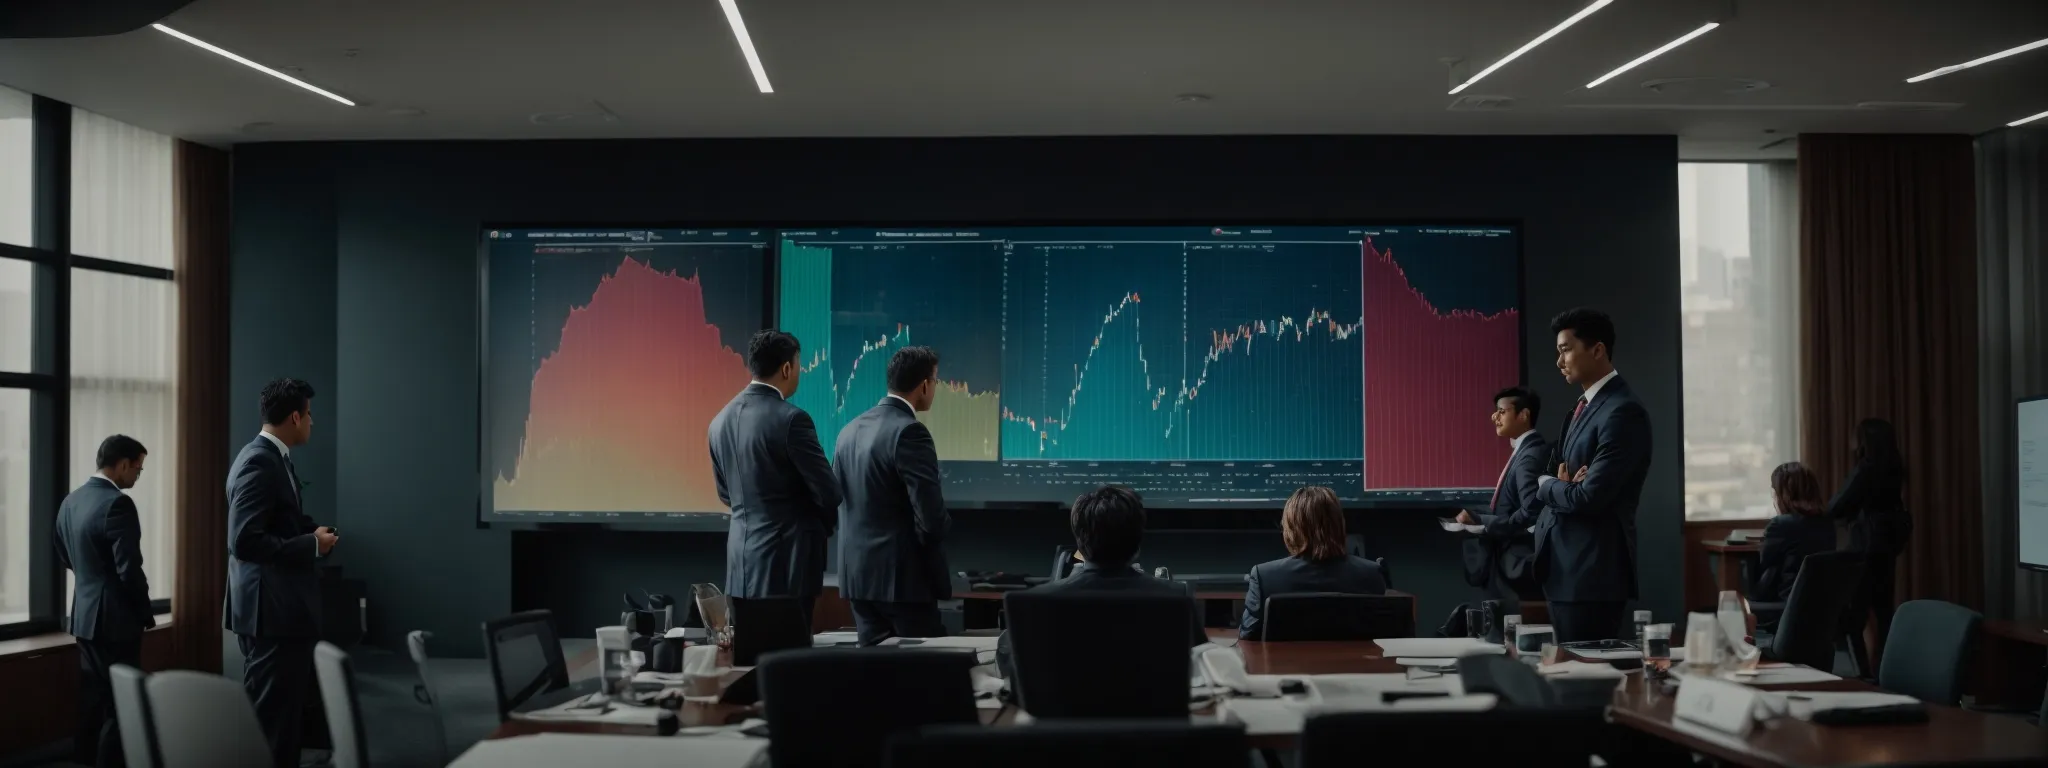 a team gathered around a conference table, intently examining a large screen displaying colorful graphs and charts.